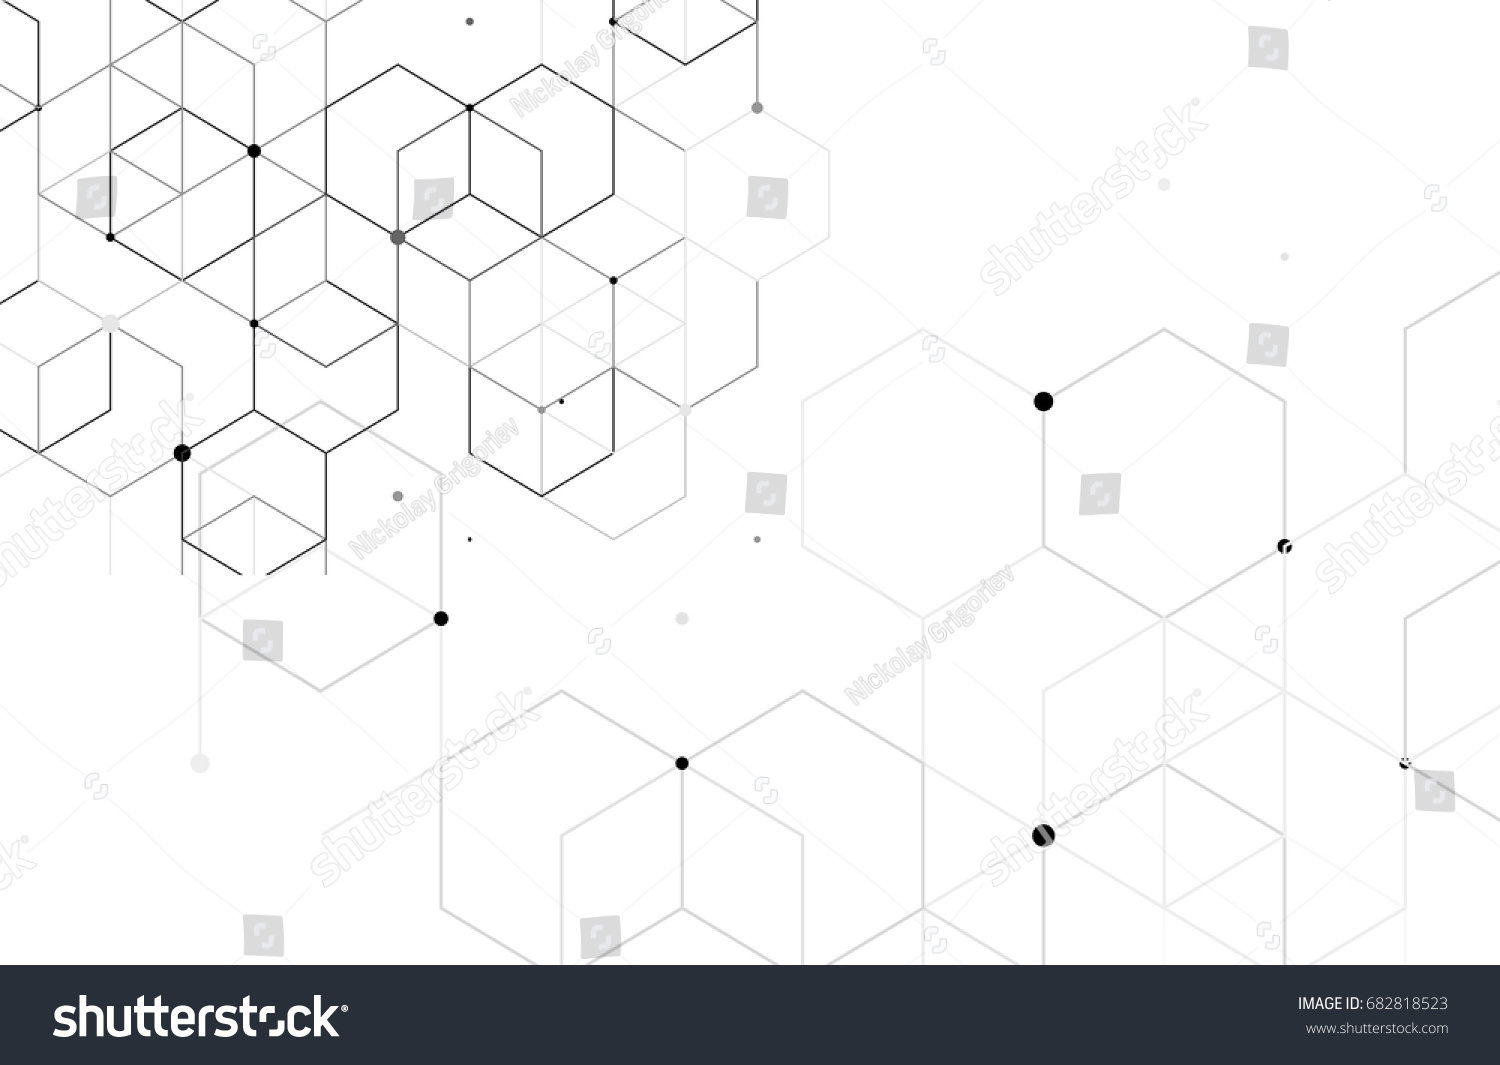 Vector abstract boxes background. Modern technology illustration with square mesh. Digital geometric abstraction with lines and points. Cube cell. #682818523